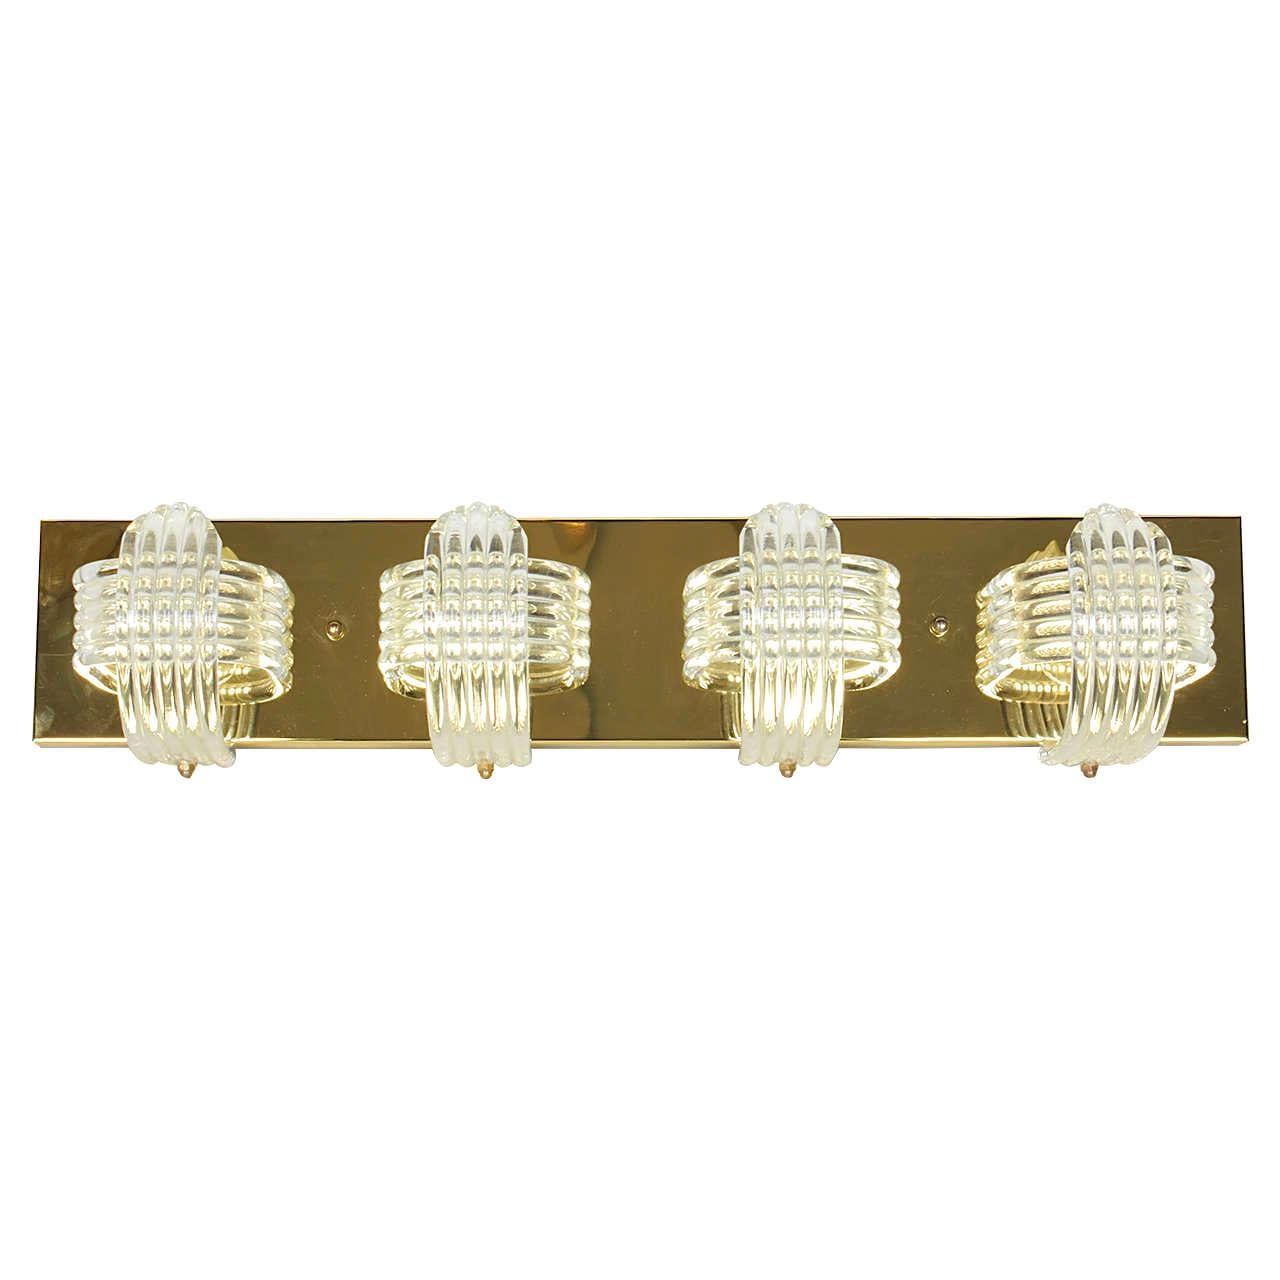 Hollywood Regency Sculptural Lucite and Brass Wall Light by Lightolier